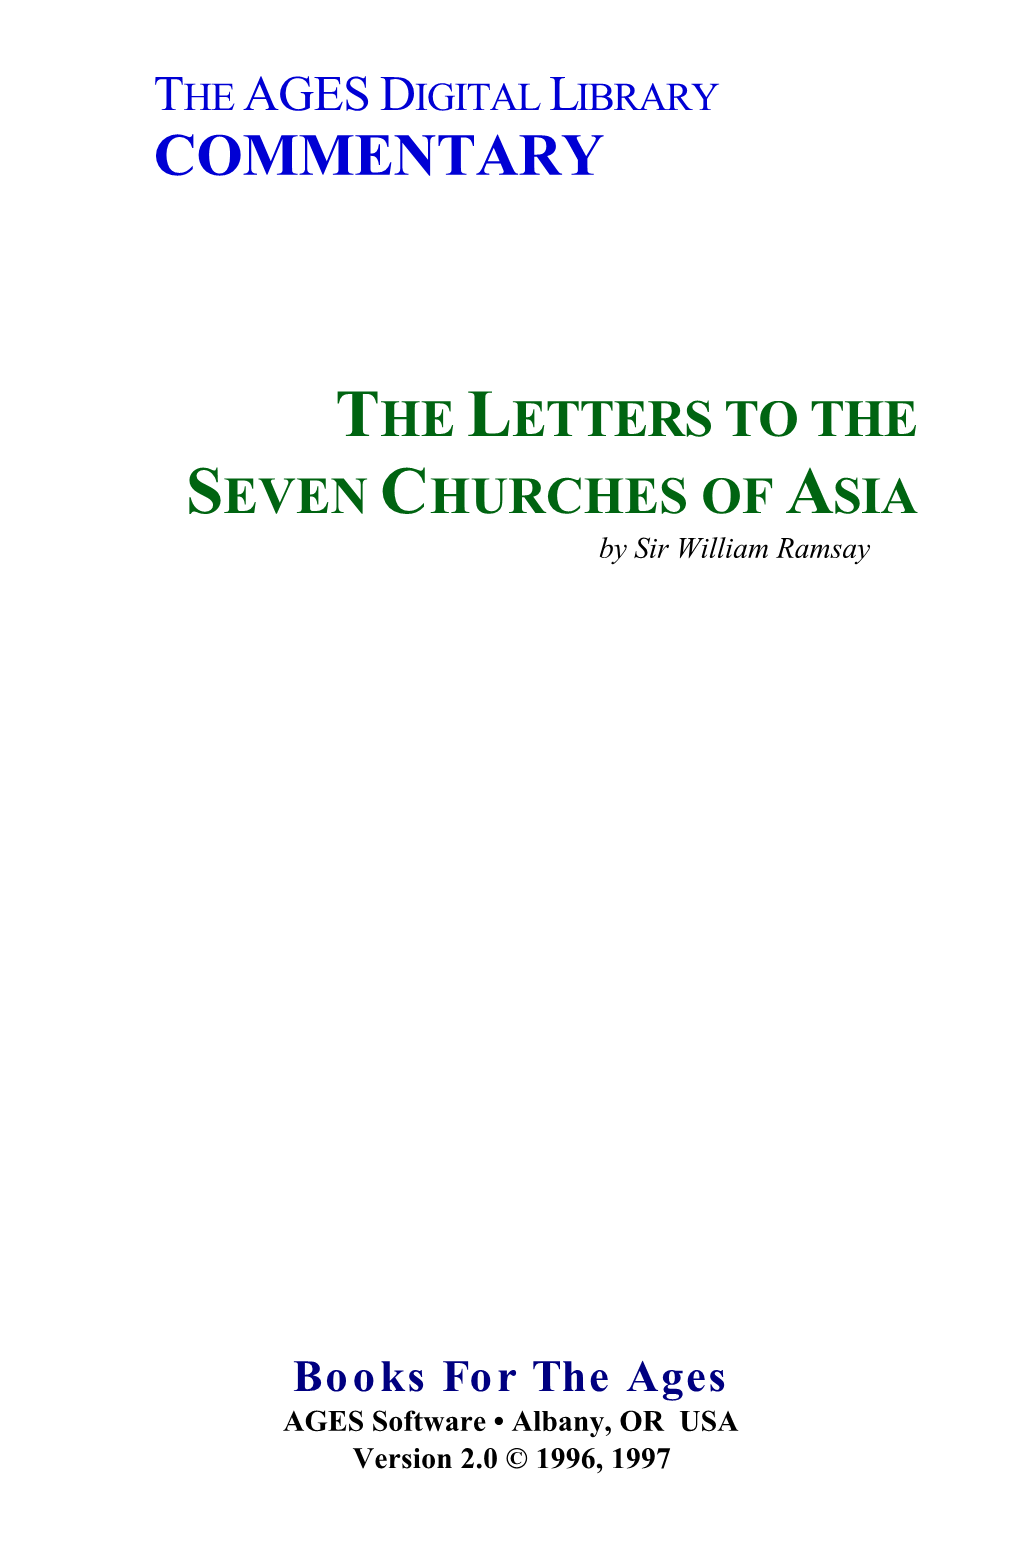 THE LETTERS to the SEVEN CHURCHES of ASIA by Sir William Ramsay